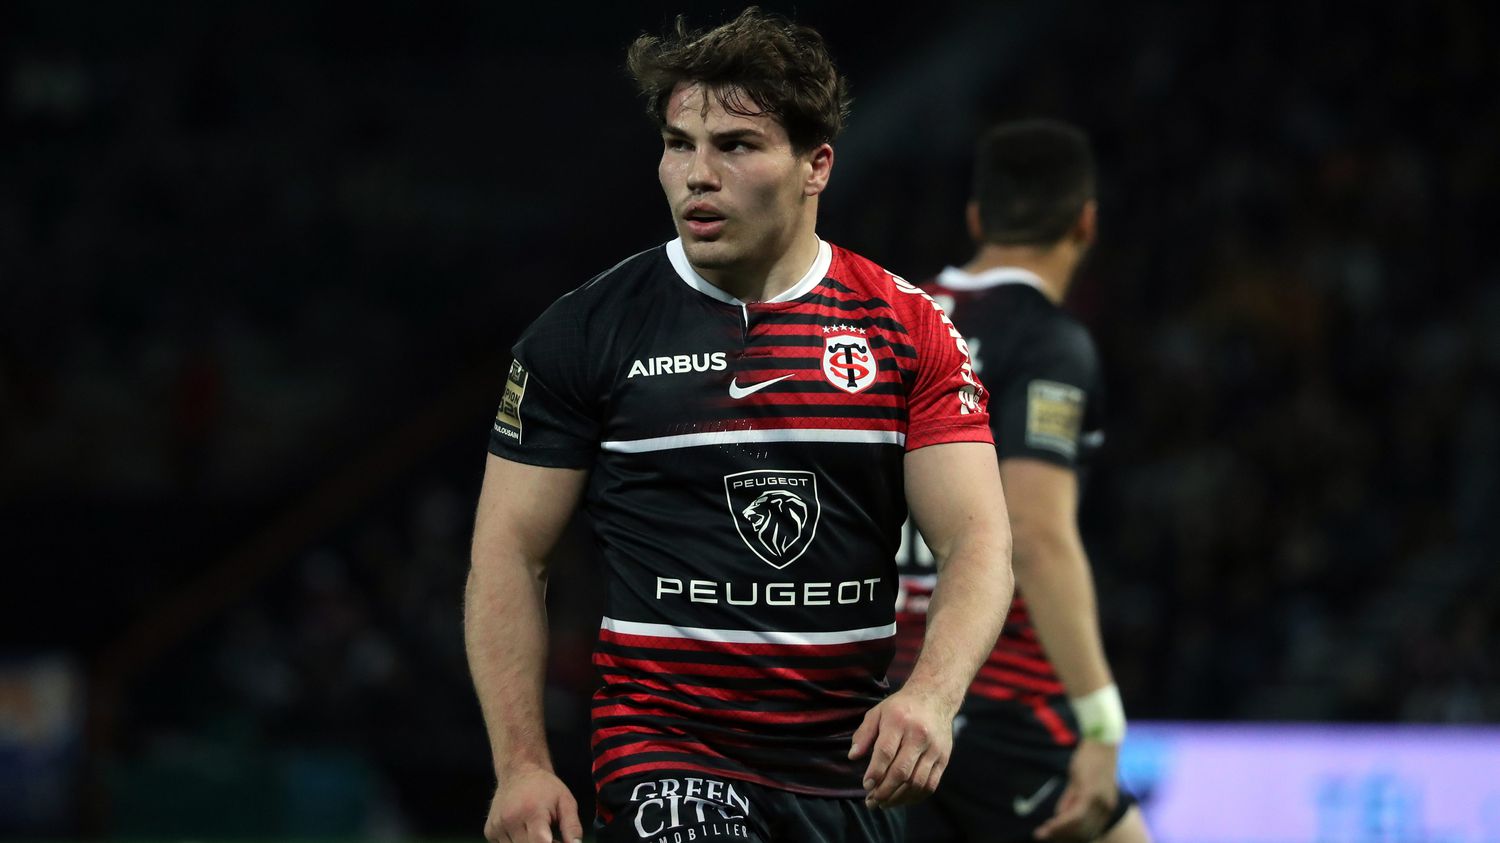 Toulouse to the Irish Reveler, the clash La Rochelle-Montpellier, Racing 92 against the sharks ... What you need to know about the quarter finals

